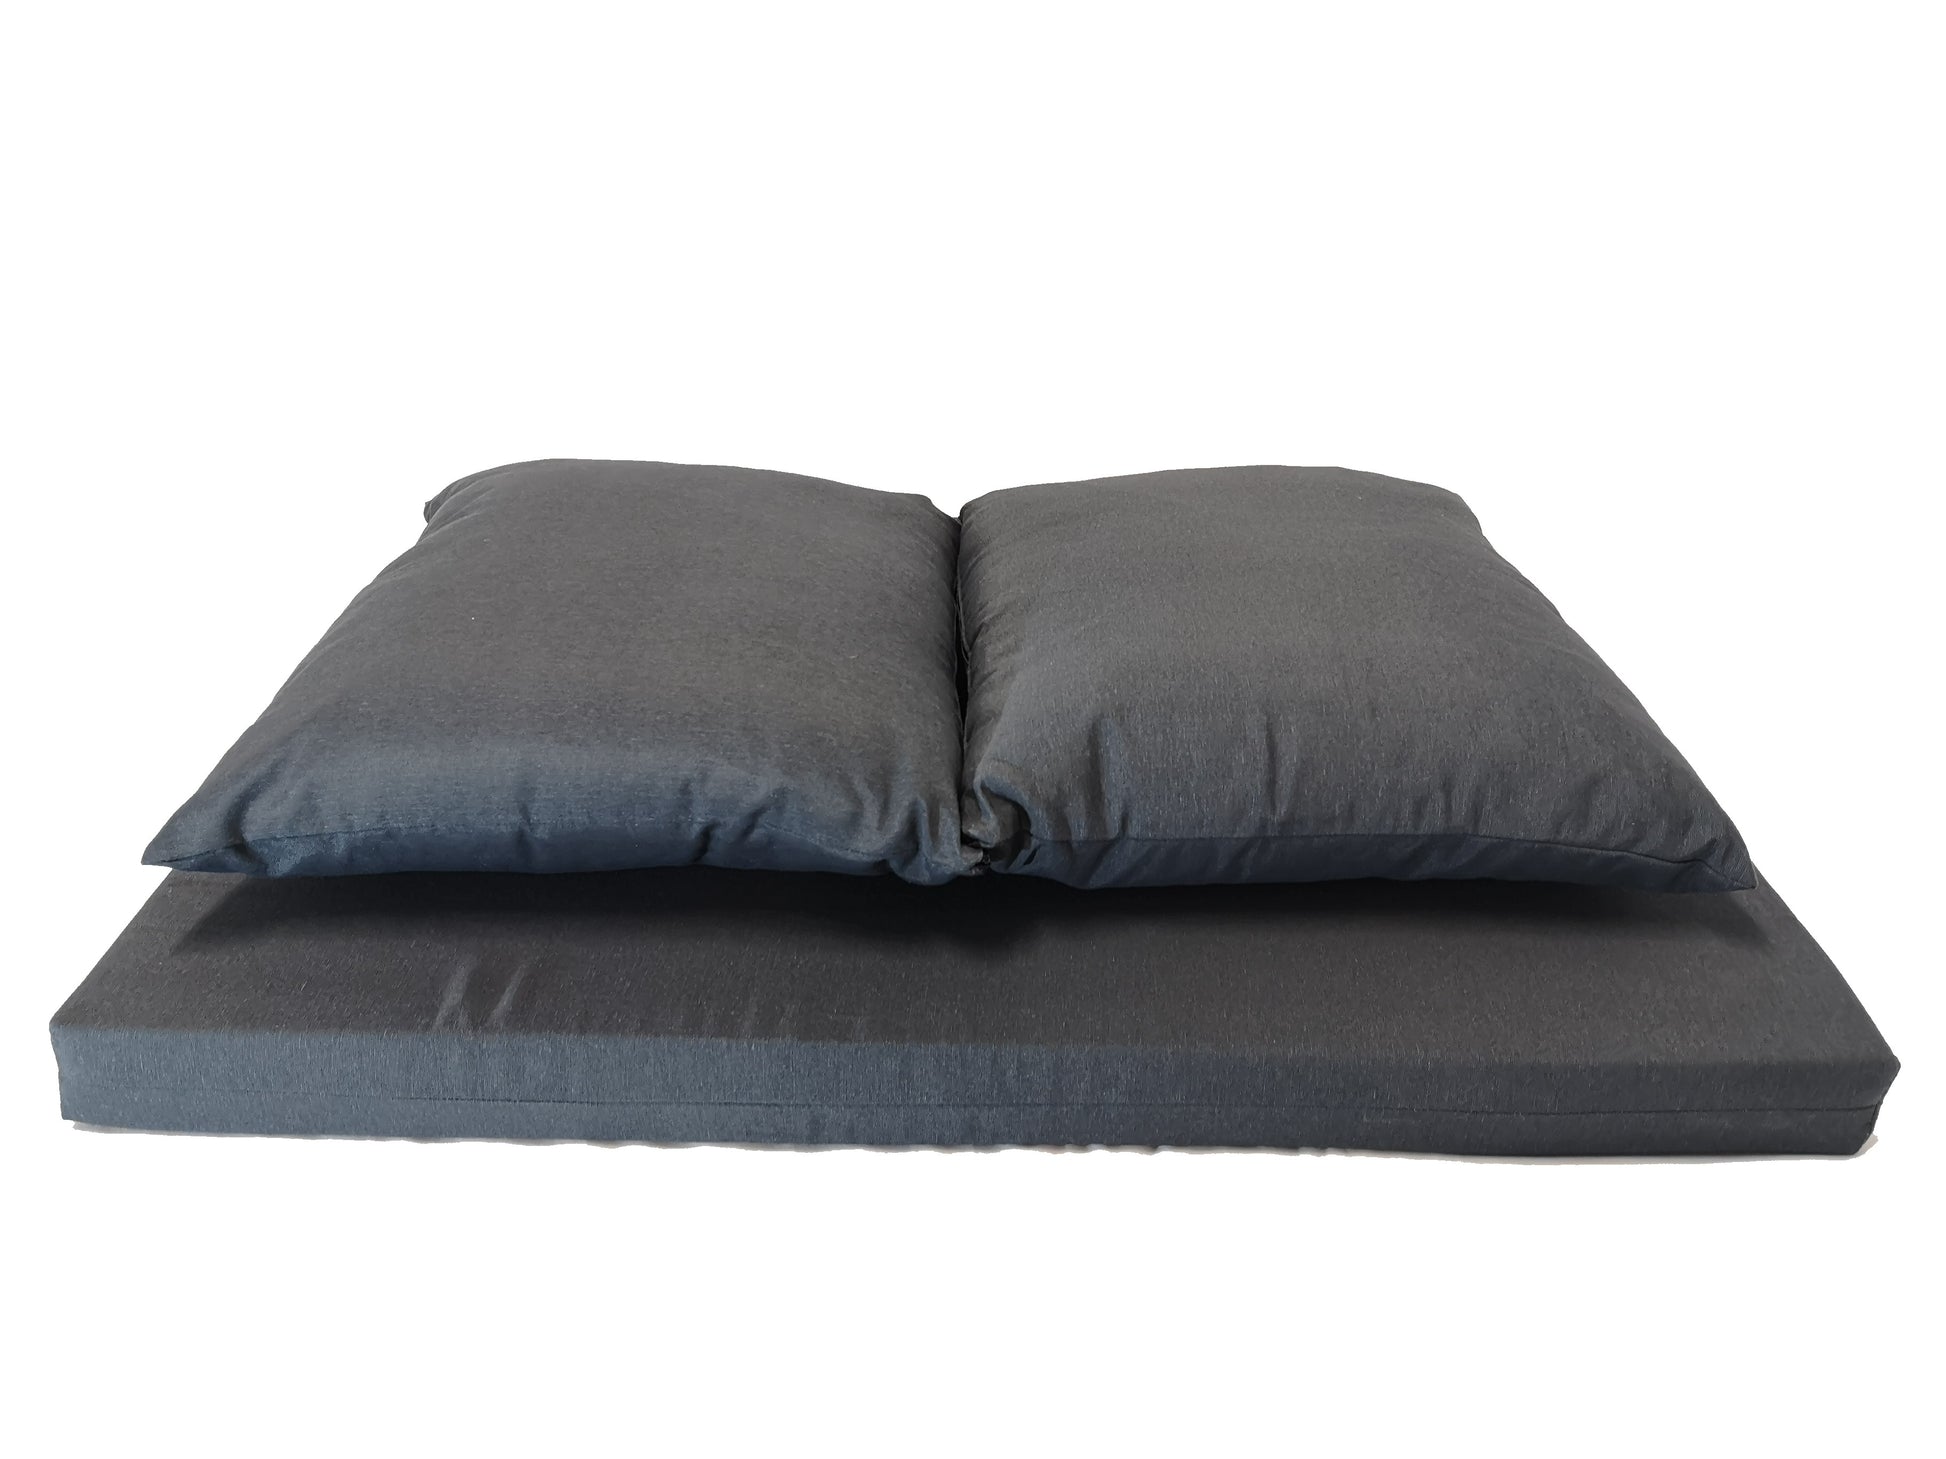 PARIS NATERIAL PALLET CUSHION 80X120X8 WITH 2 CUSHIONS 80X120 ANTHRACITE